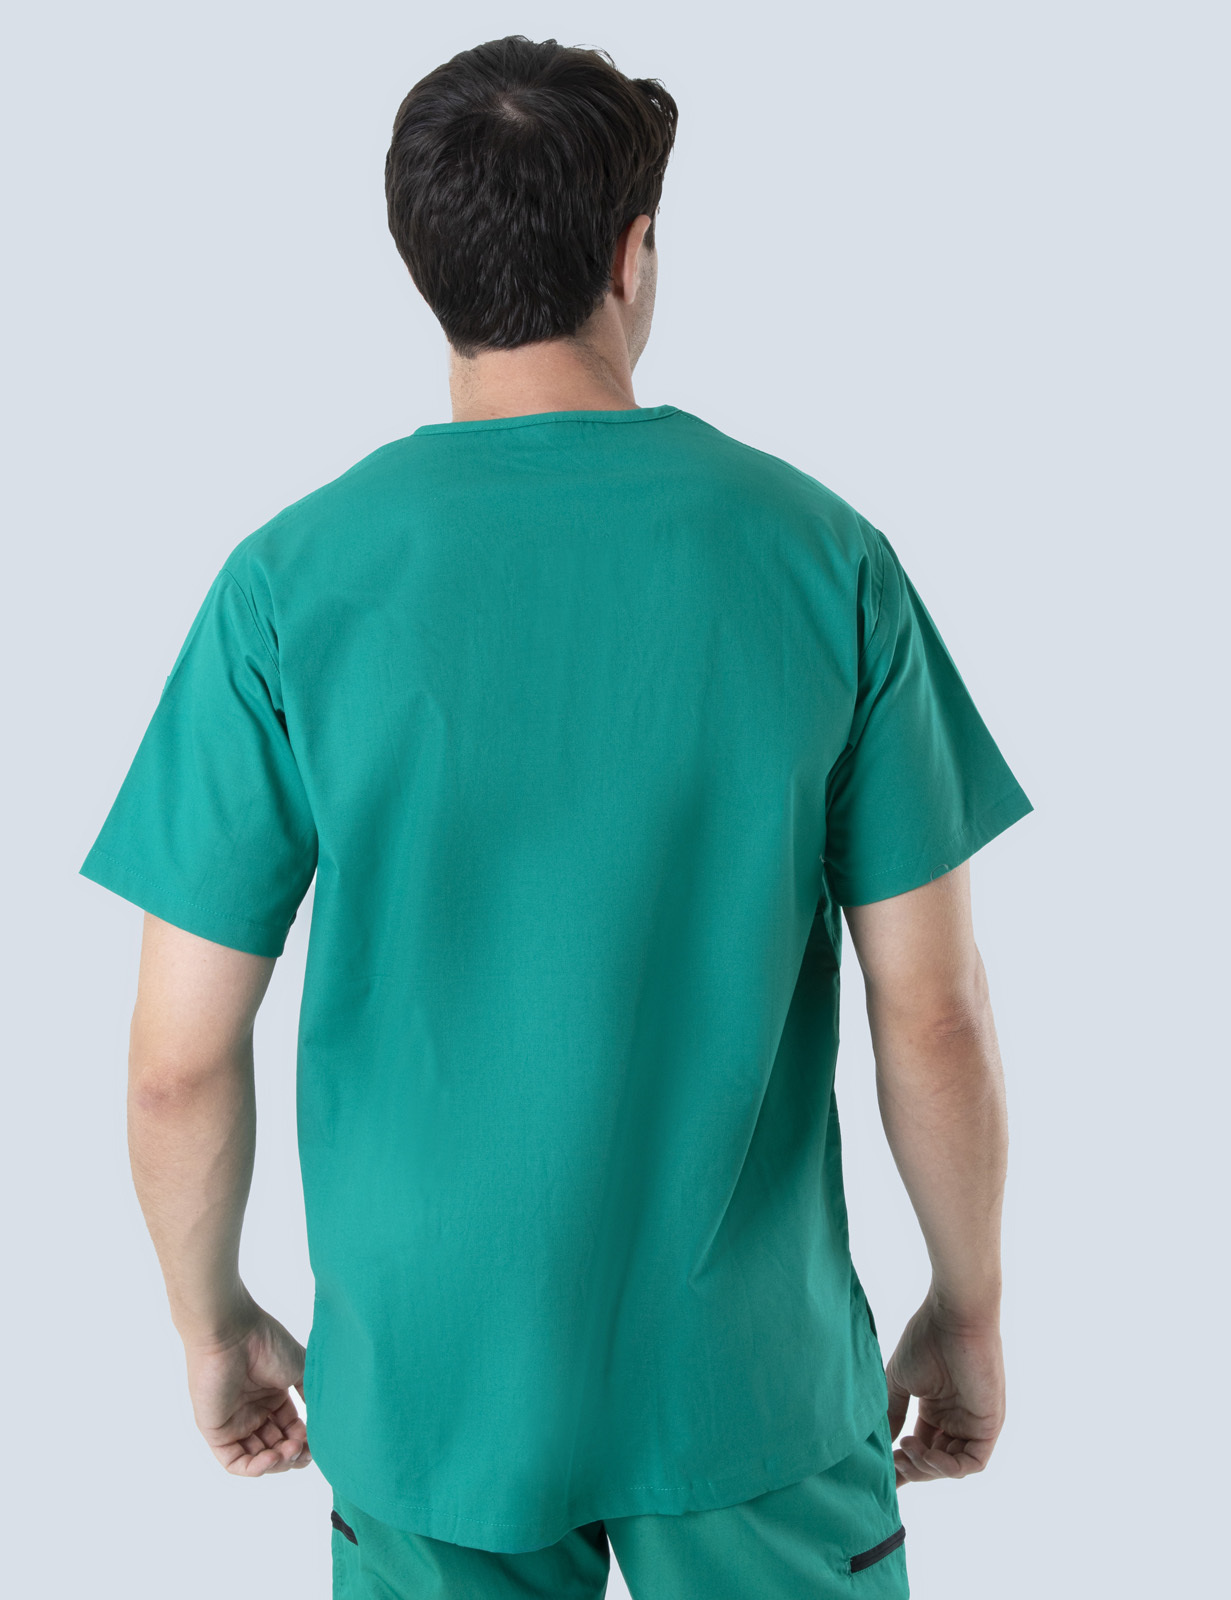 Men's Fit Solid Scrub Top - Hunter - 4X large - 1